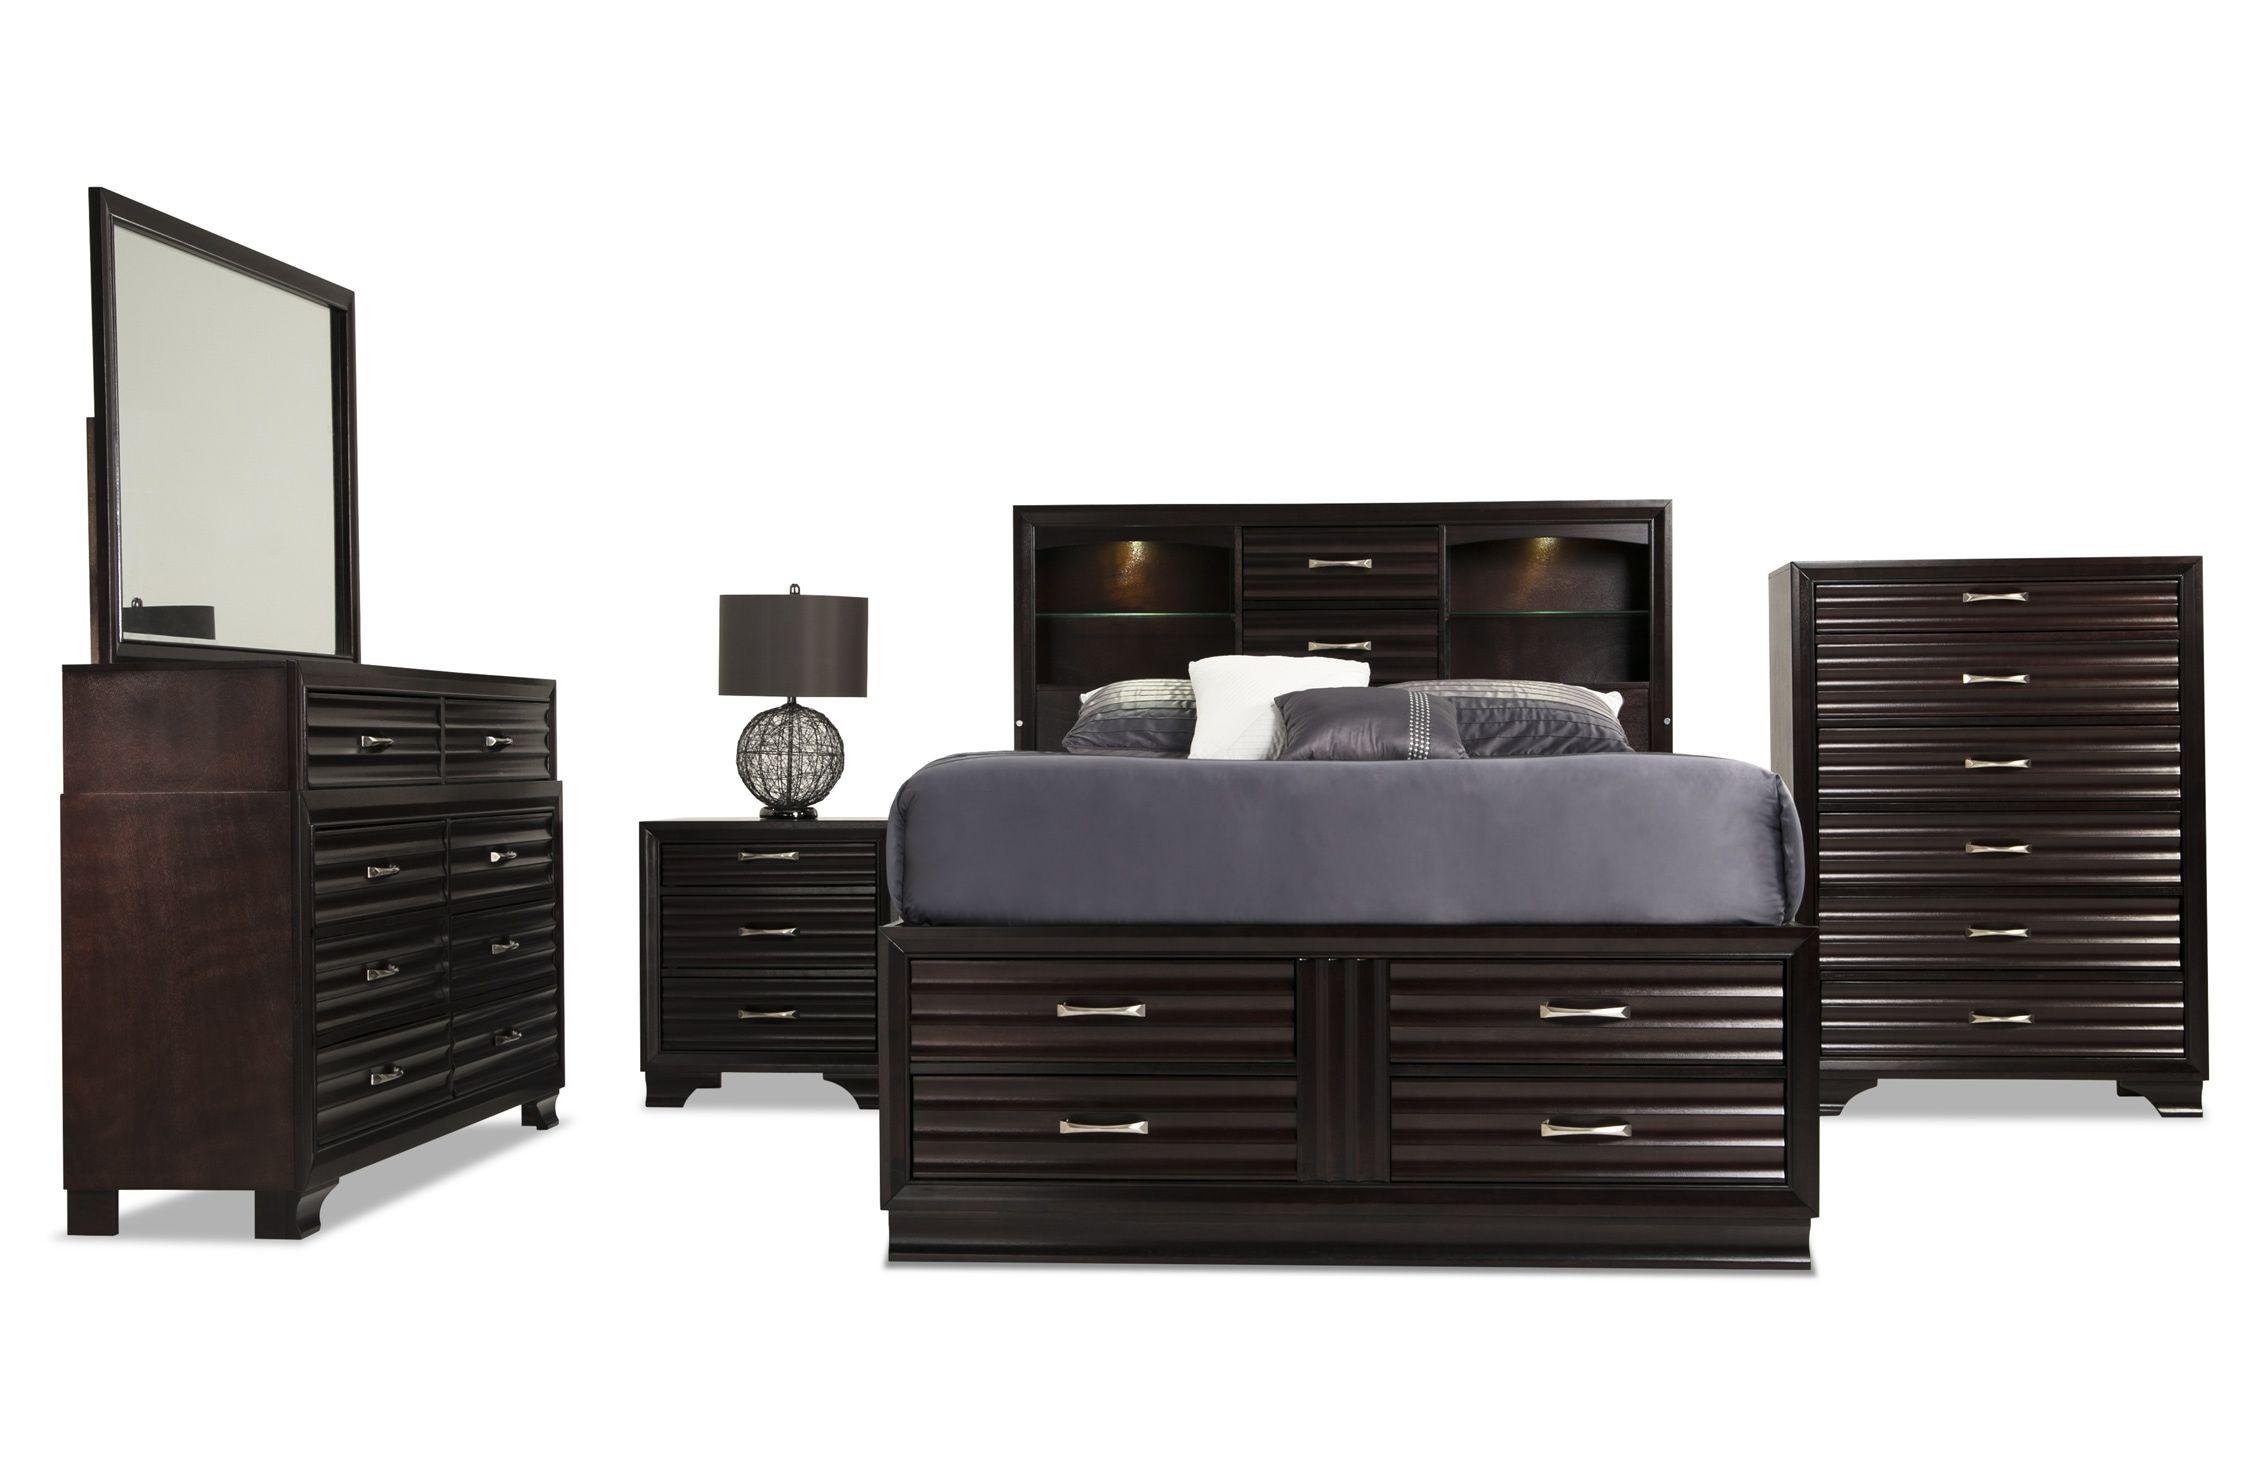 Midtown Storage Bedroom Set Home Decorating Ideas In 2019 throughout dimensions 2268 X 1468